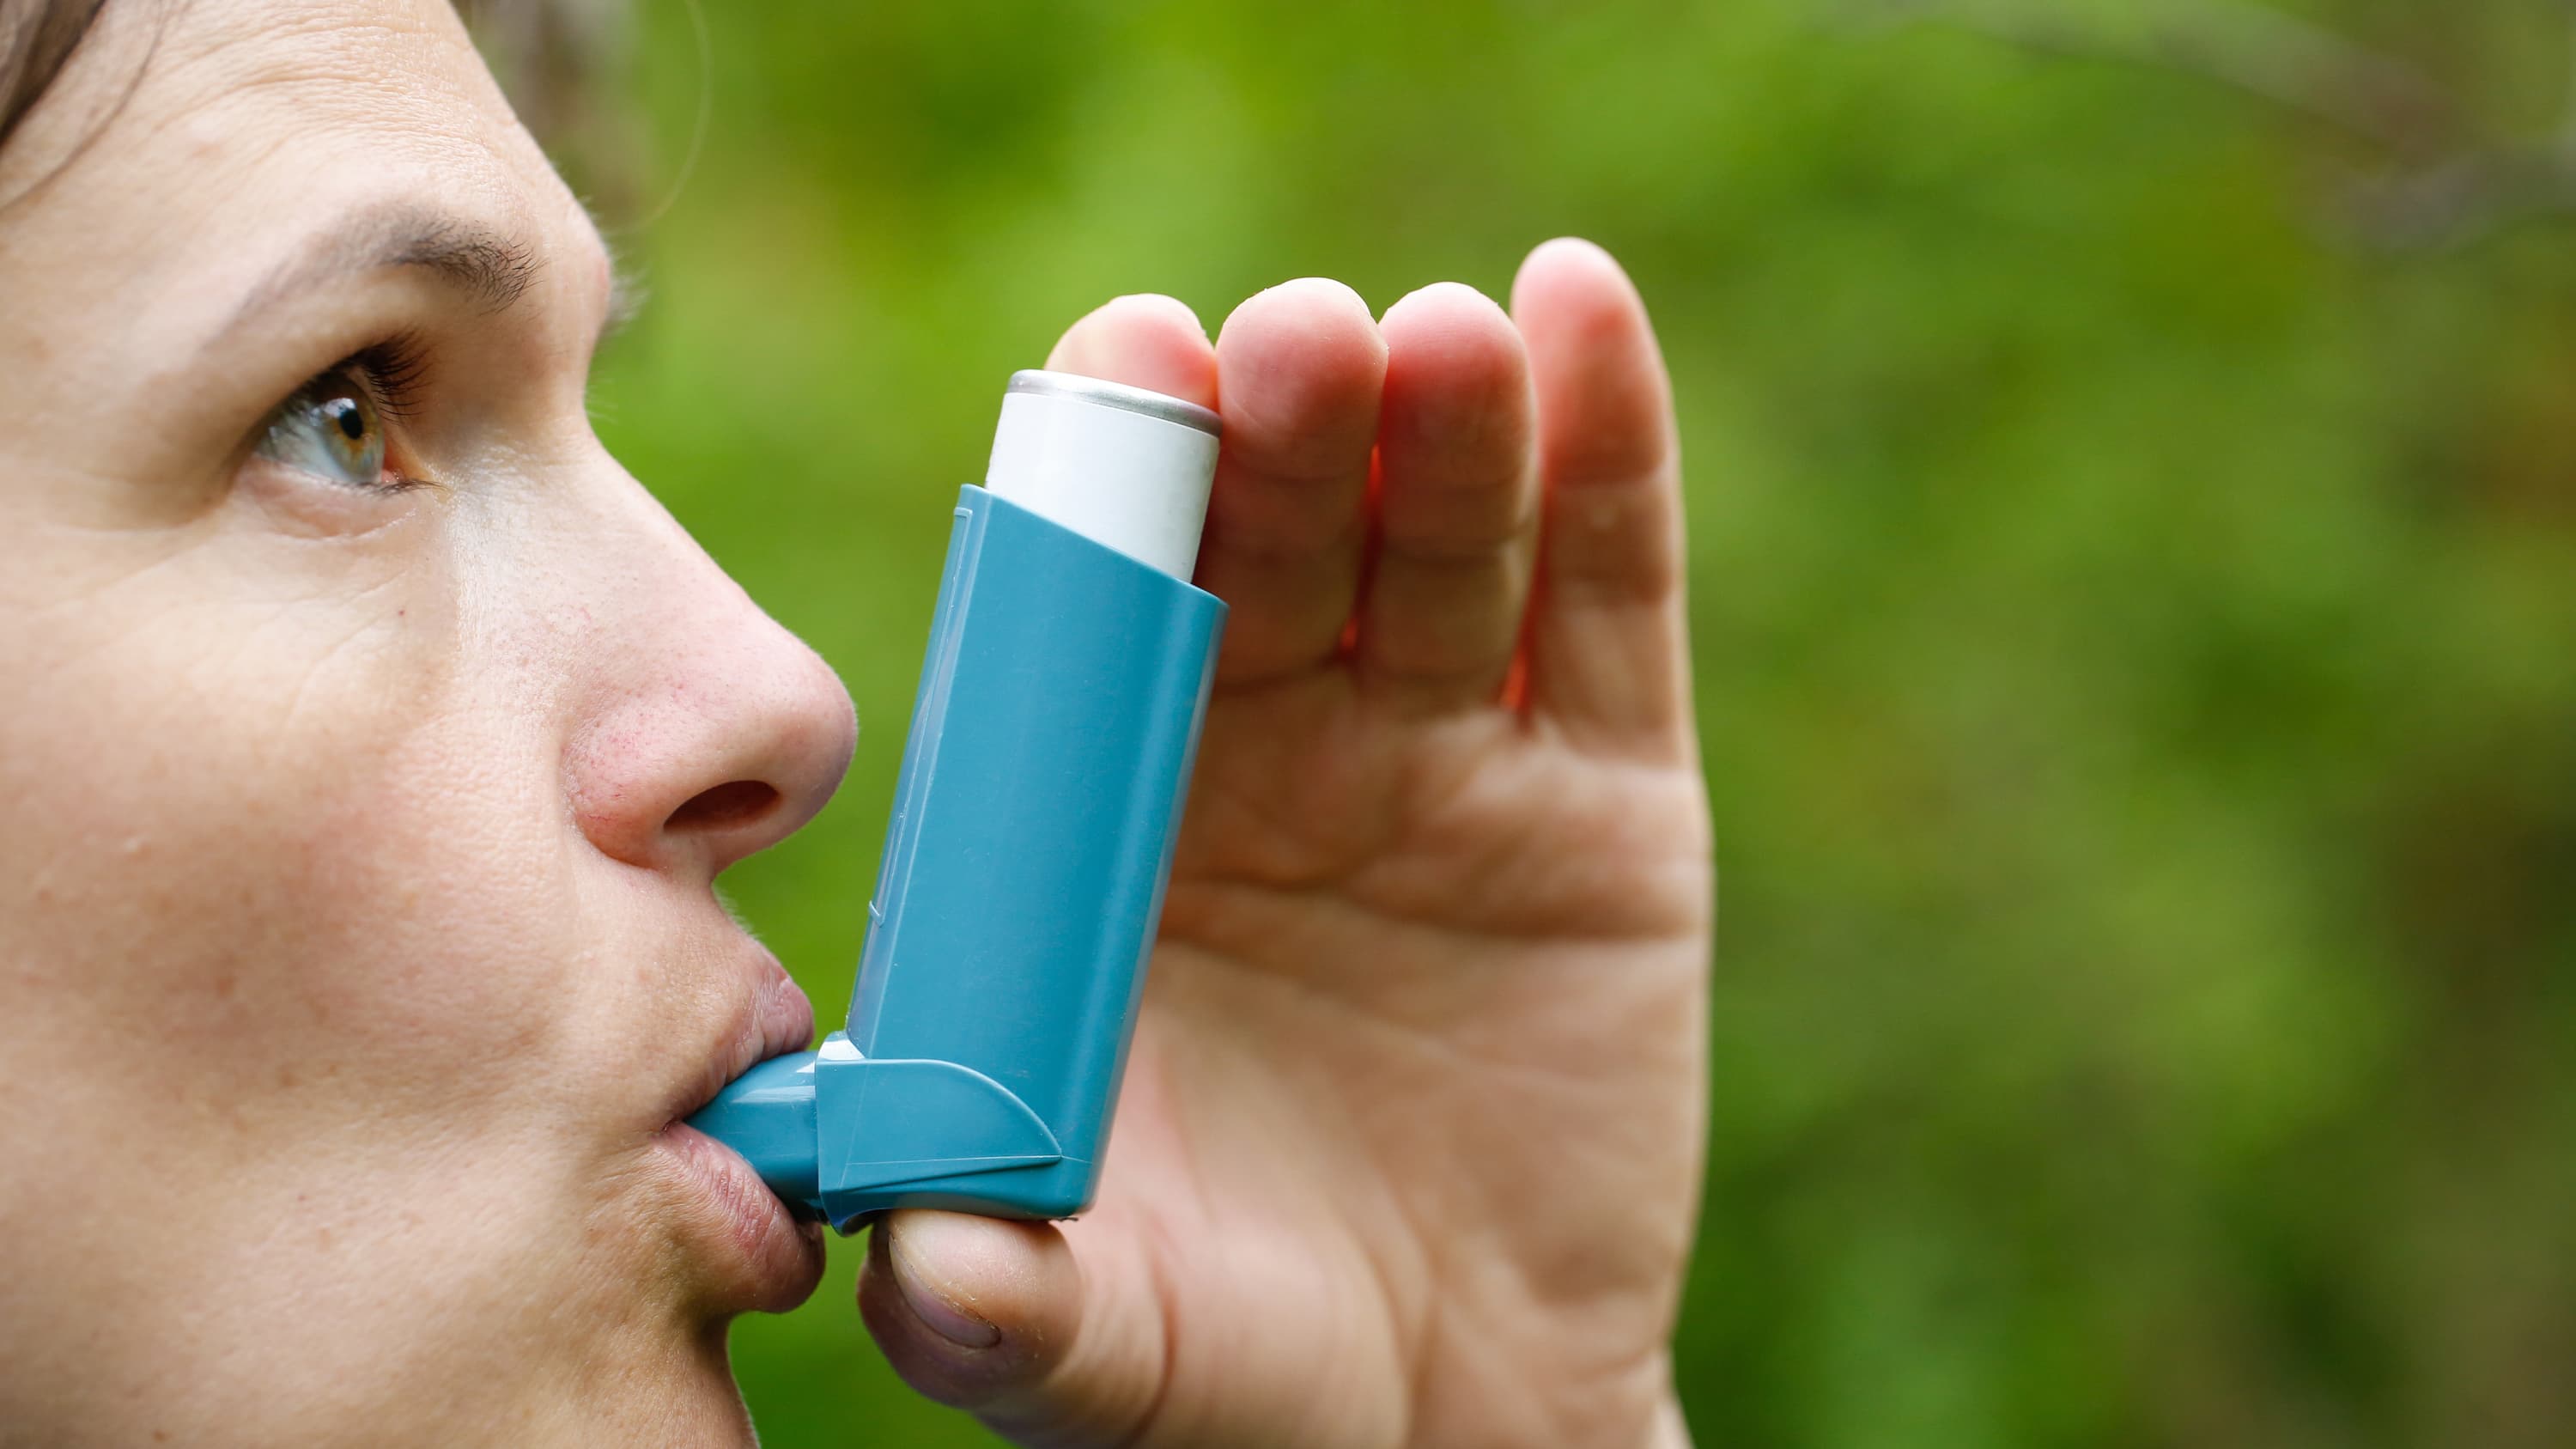 A woman with chronic obstructive pulmonary disease is using a blue inhaler.